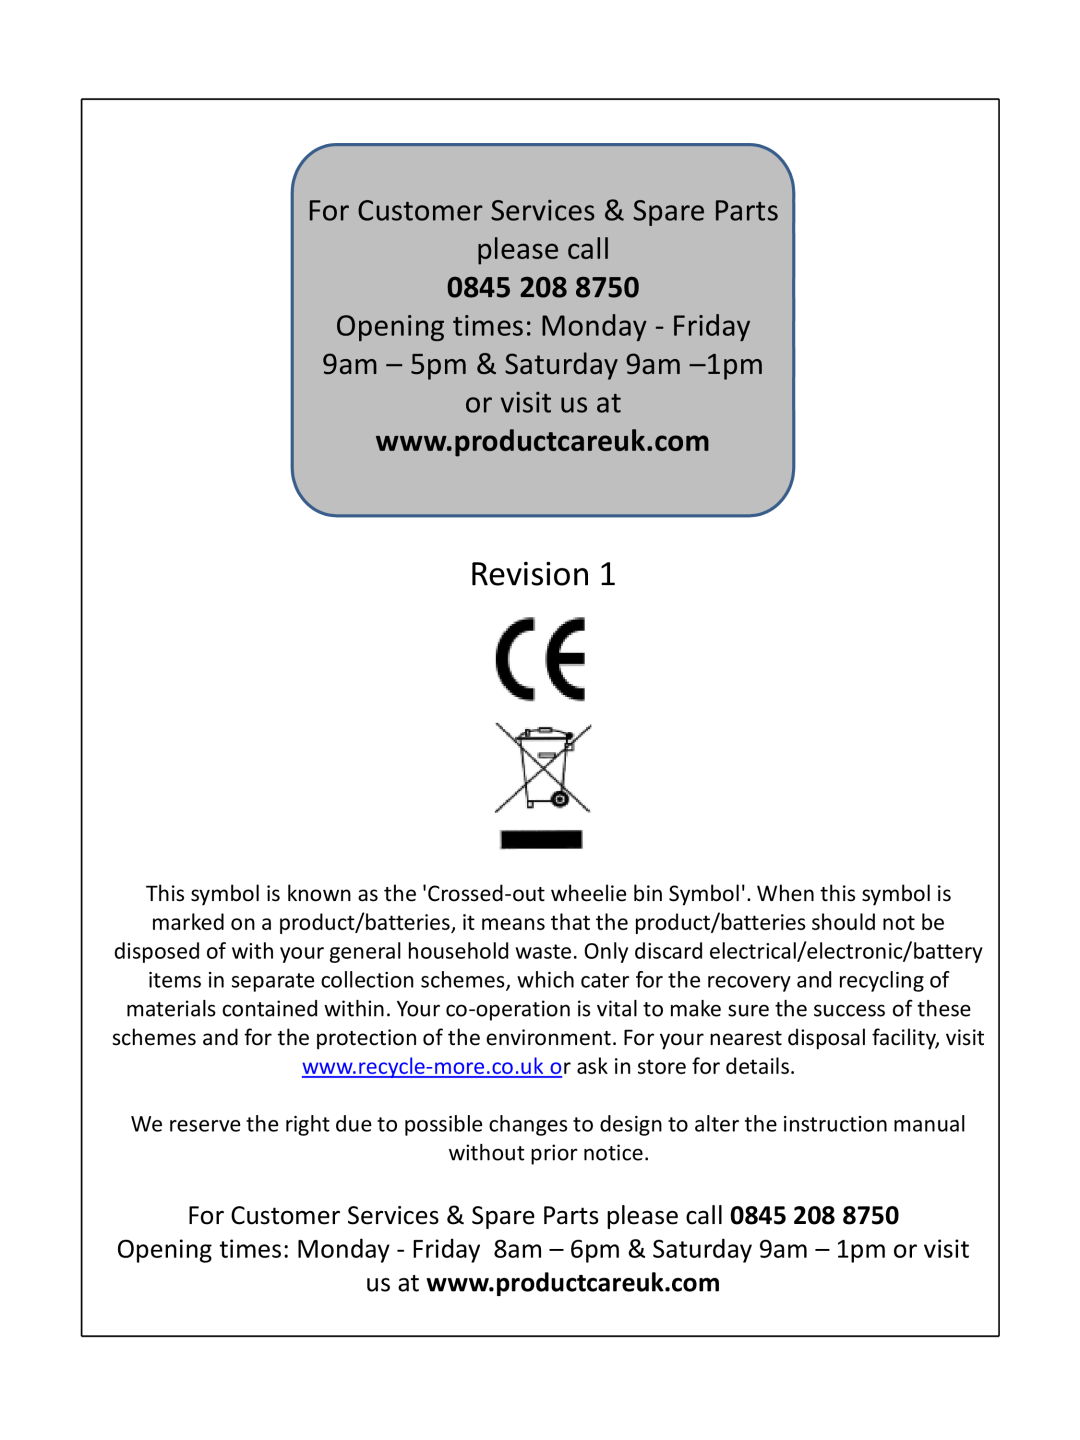 Russell Hobbs RHUCFF48(B) instruction manual Revision, For Customer Services & Spare Parts please call, 0845 